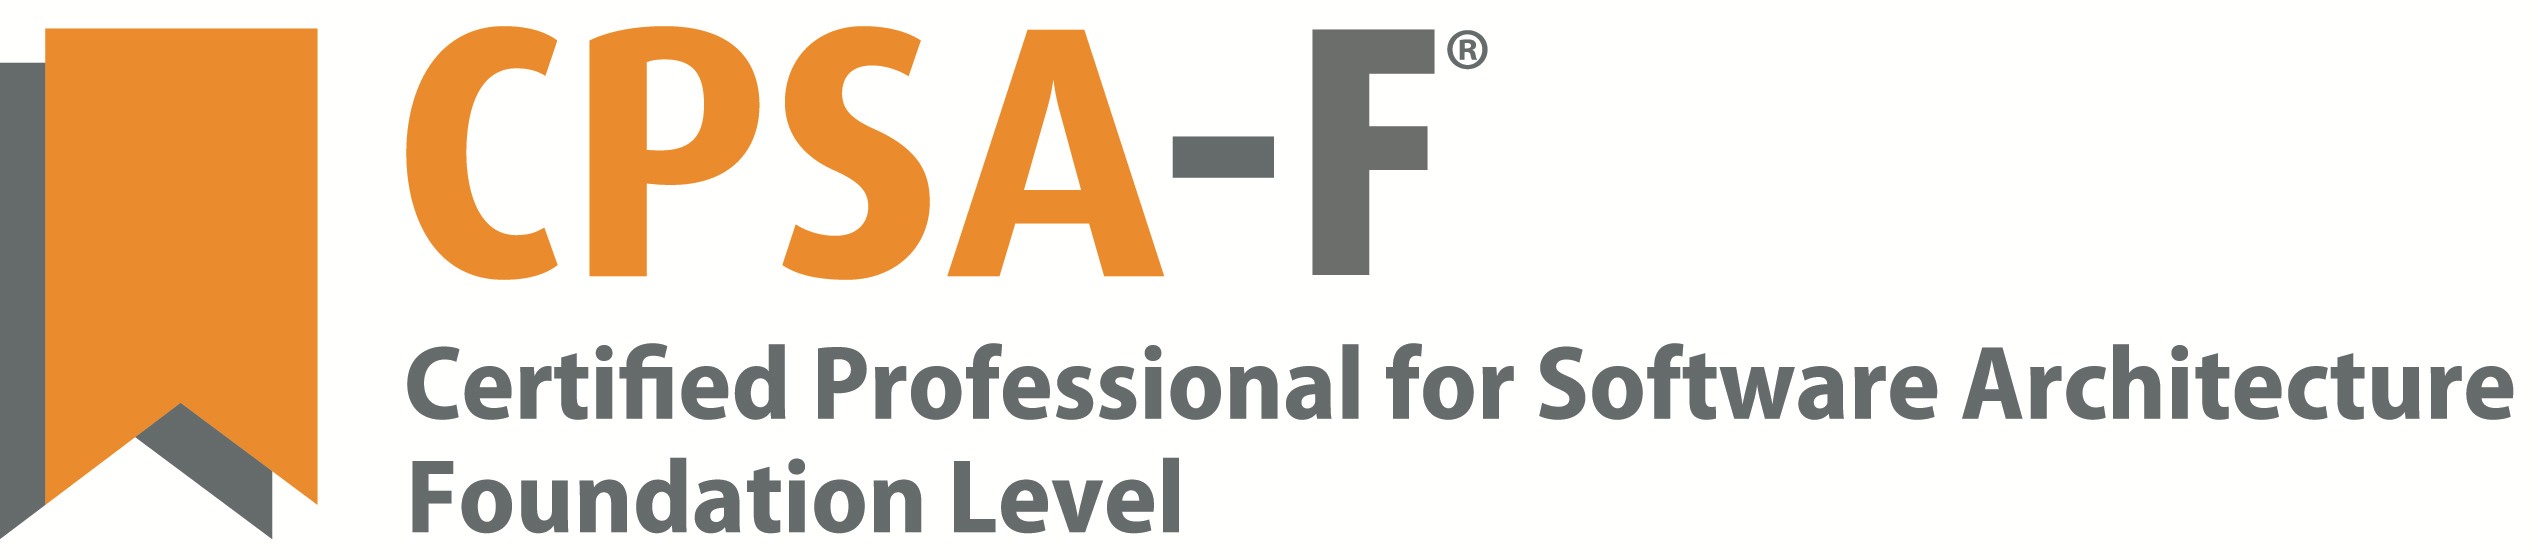 Certified Professional for Software Architecture